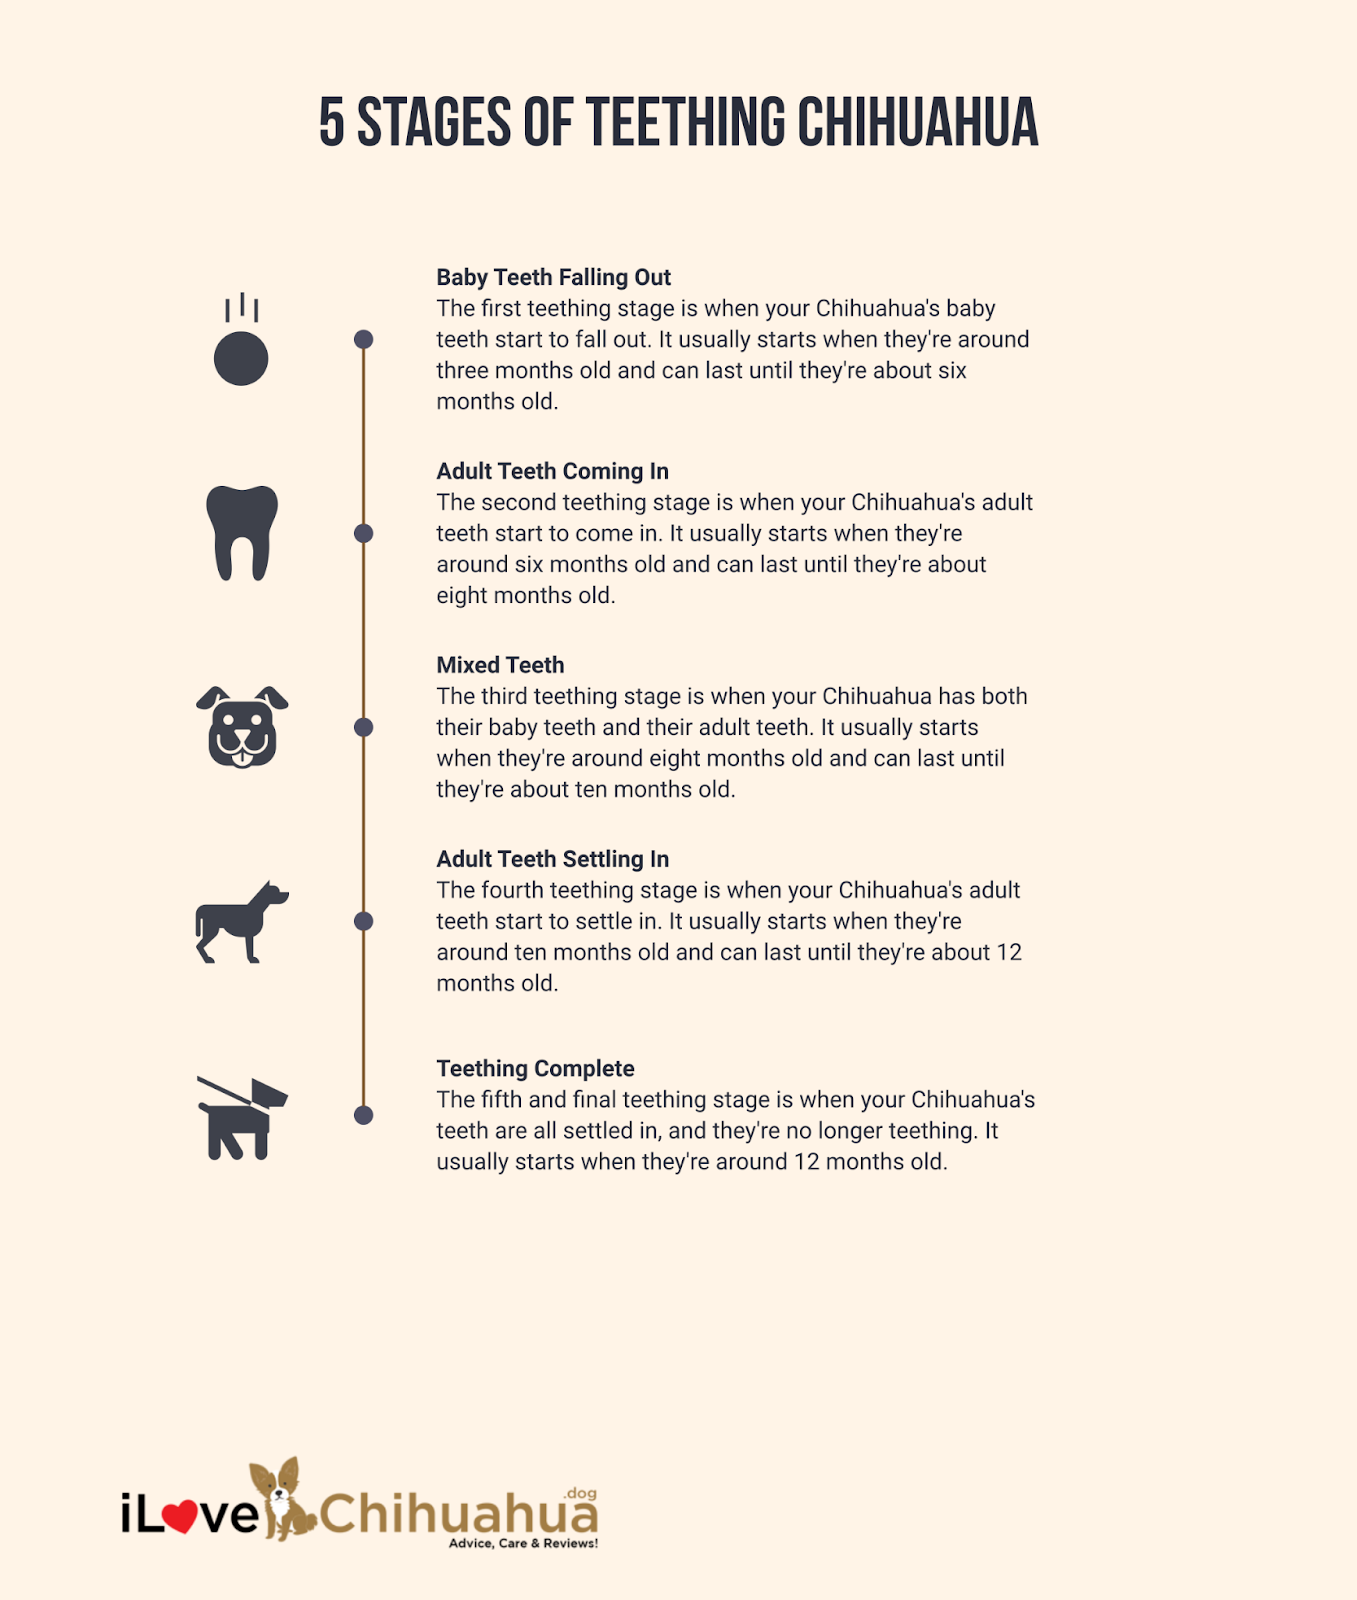 5 Stages of Teething Chihuahua